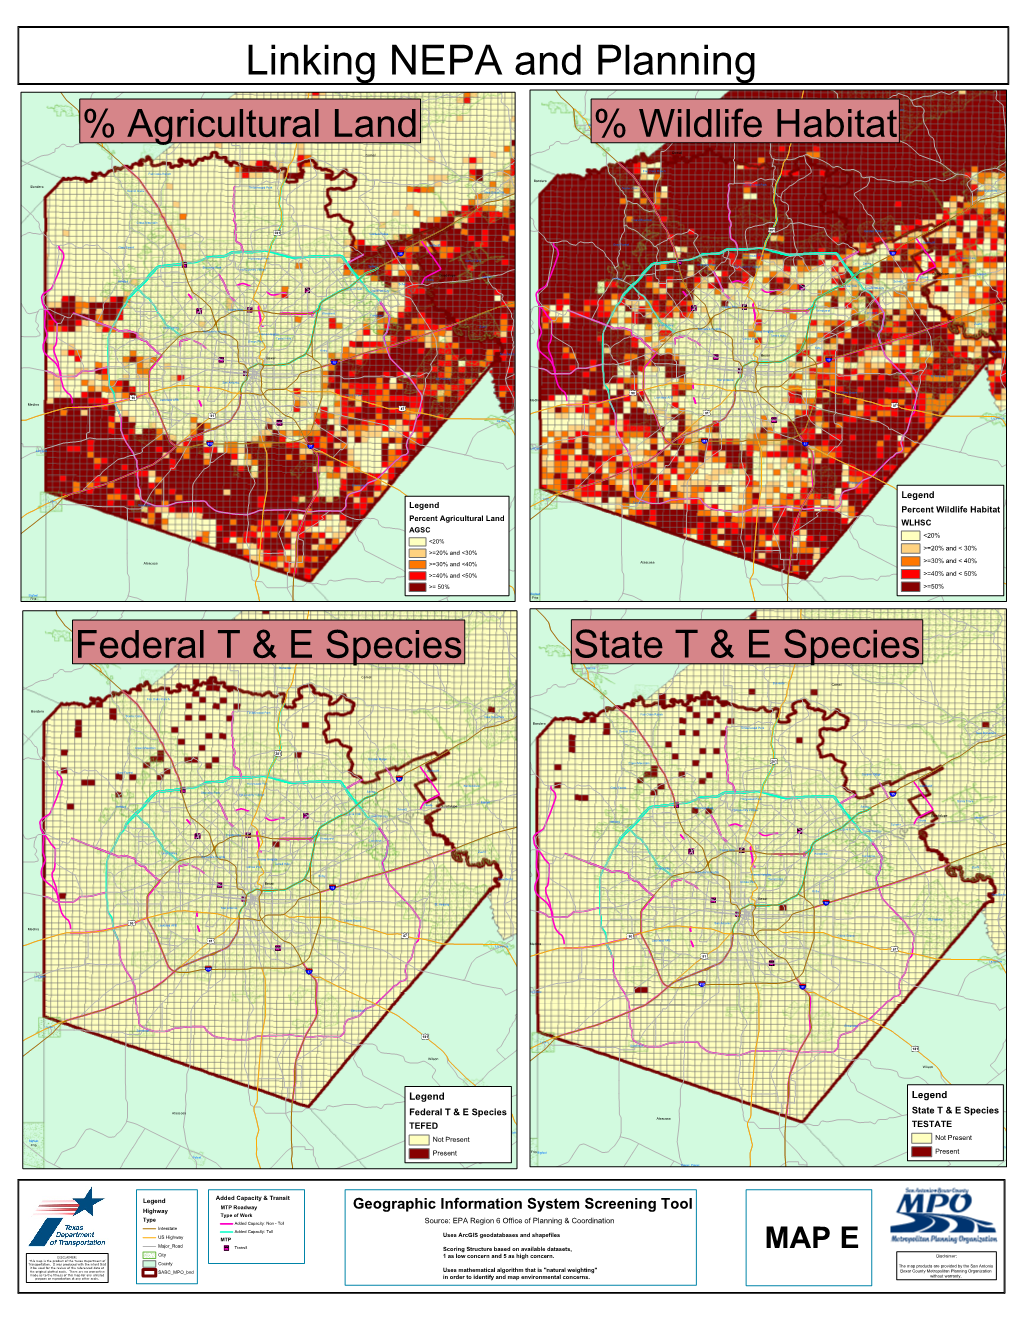 MAP E Geographic Information System Screening Tool